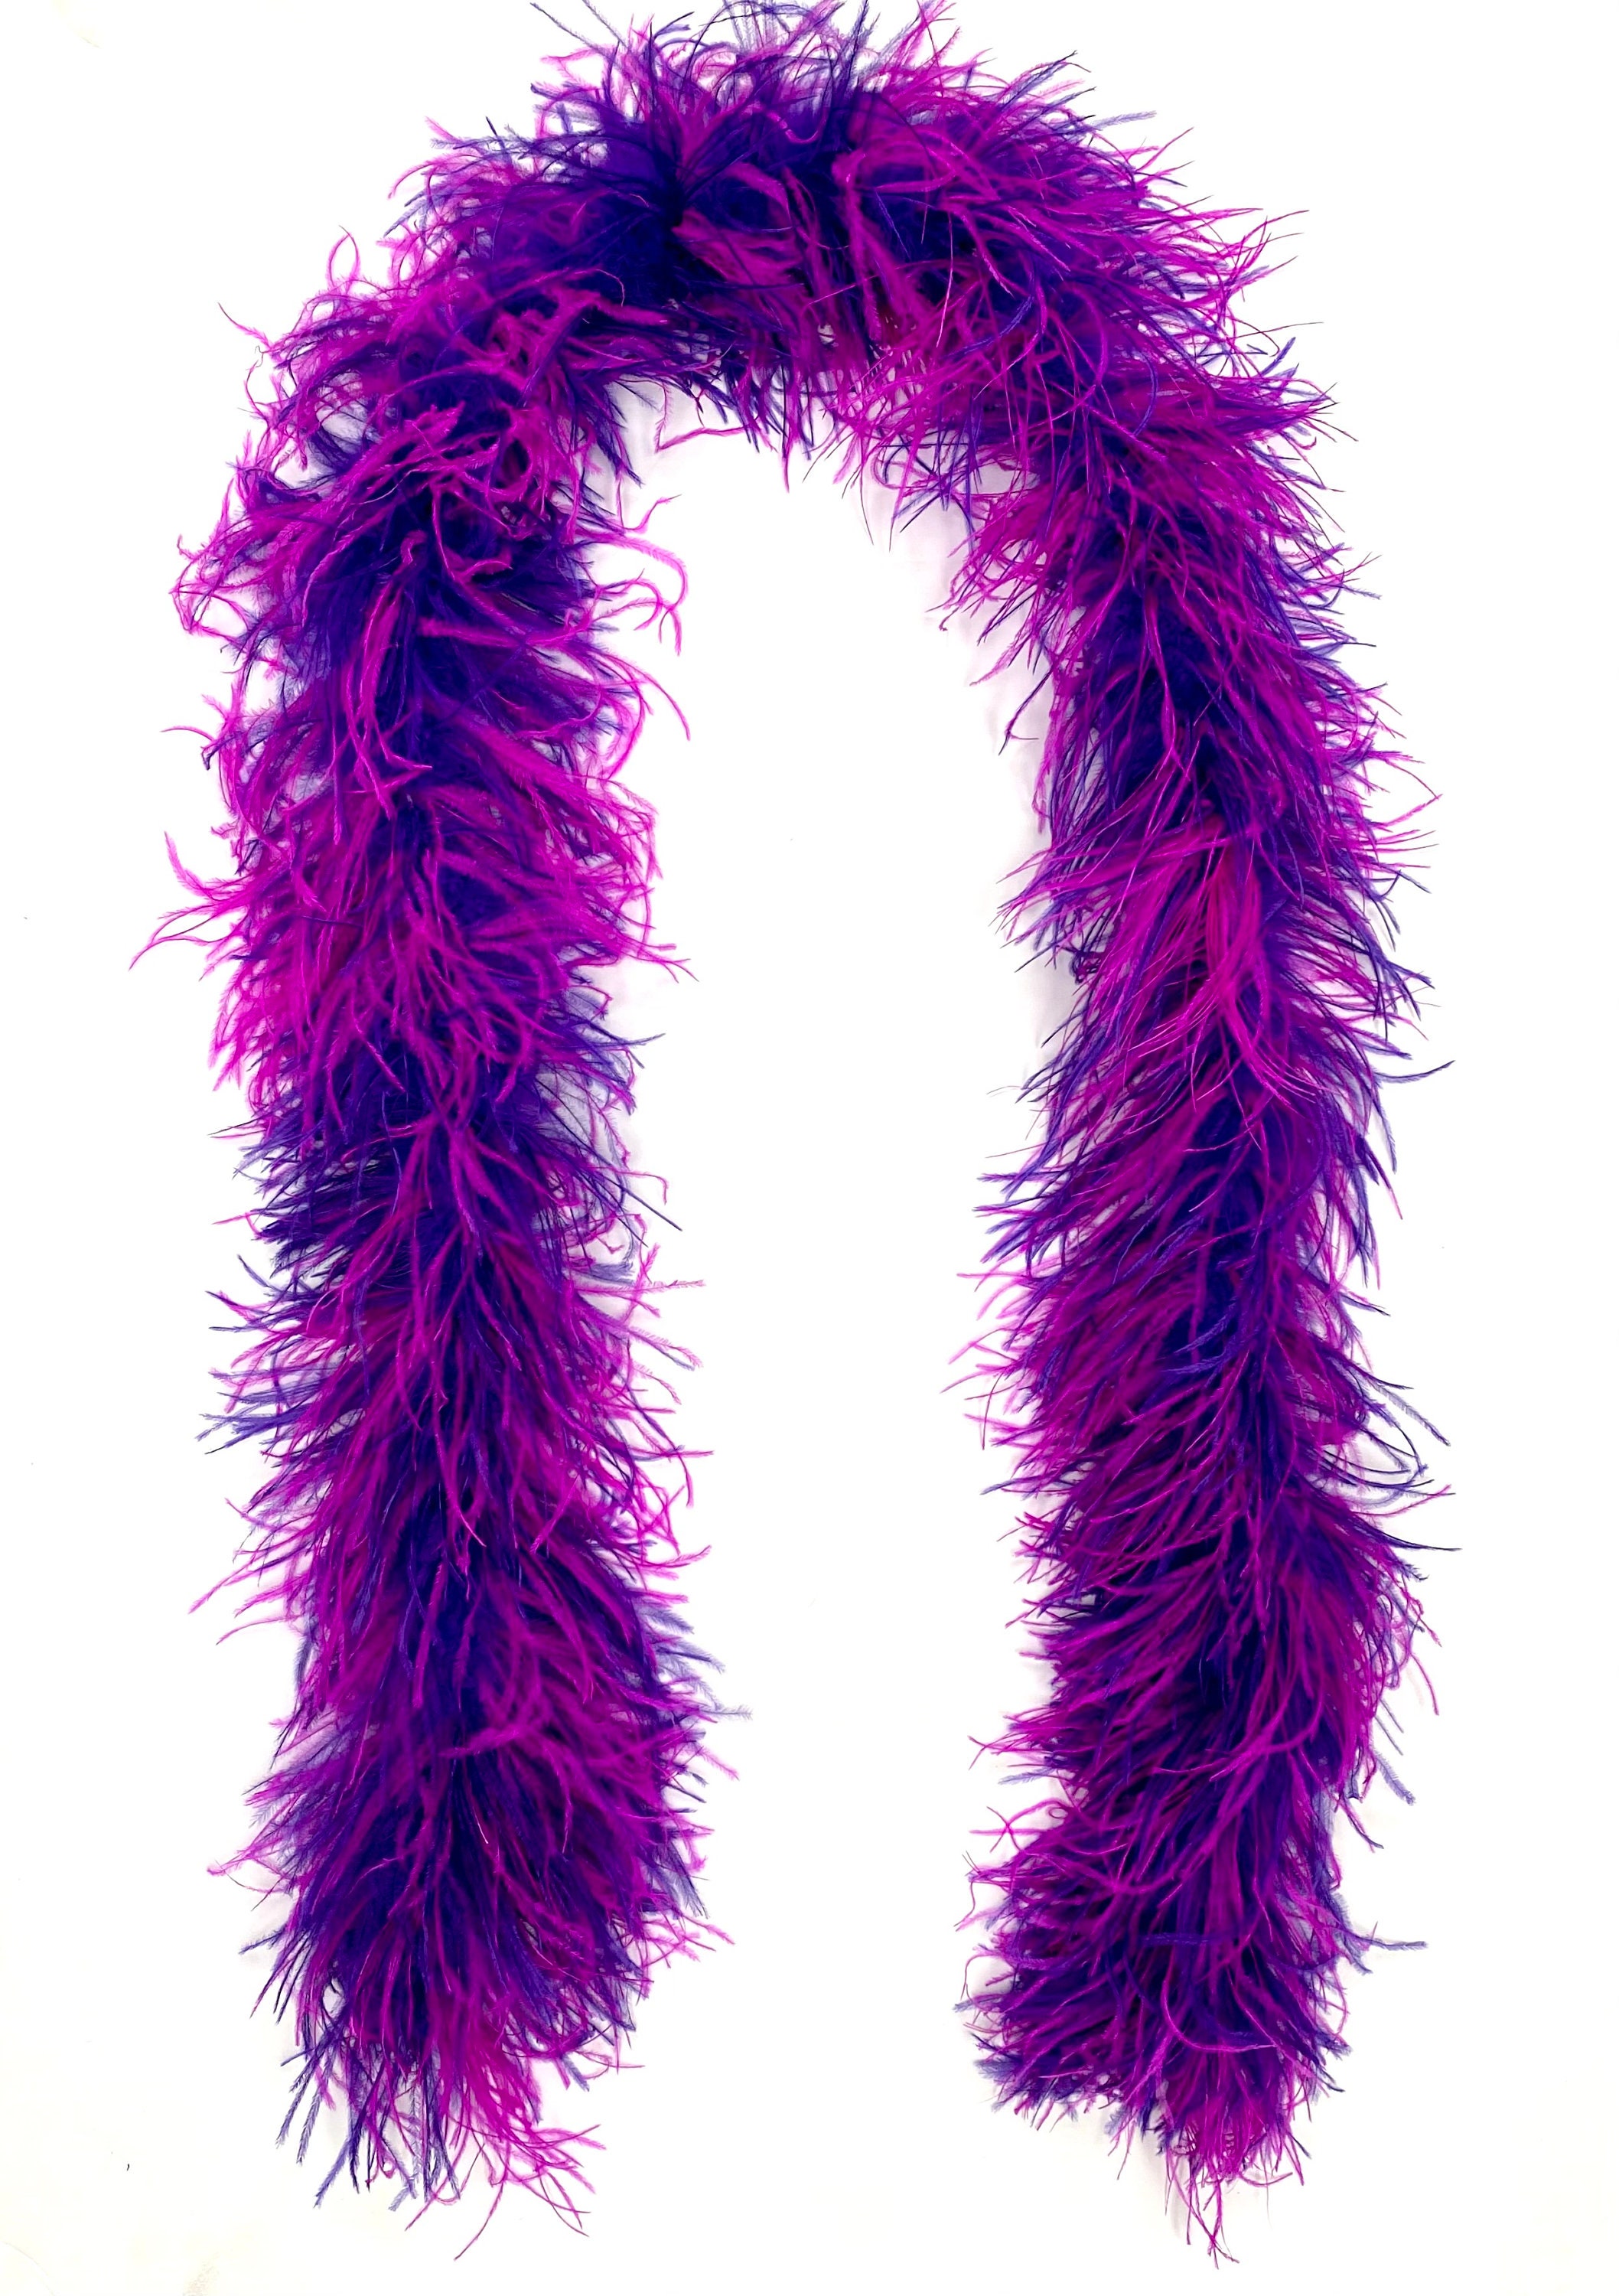 Larryhot Purple Feather Boas for Party - 80g 2Yards Boas for  Adults,Carnival,Costume,Concert and Home Decoration(80g - Purple)